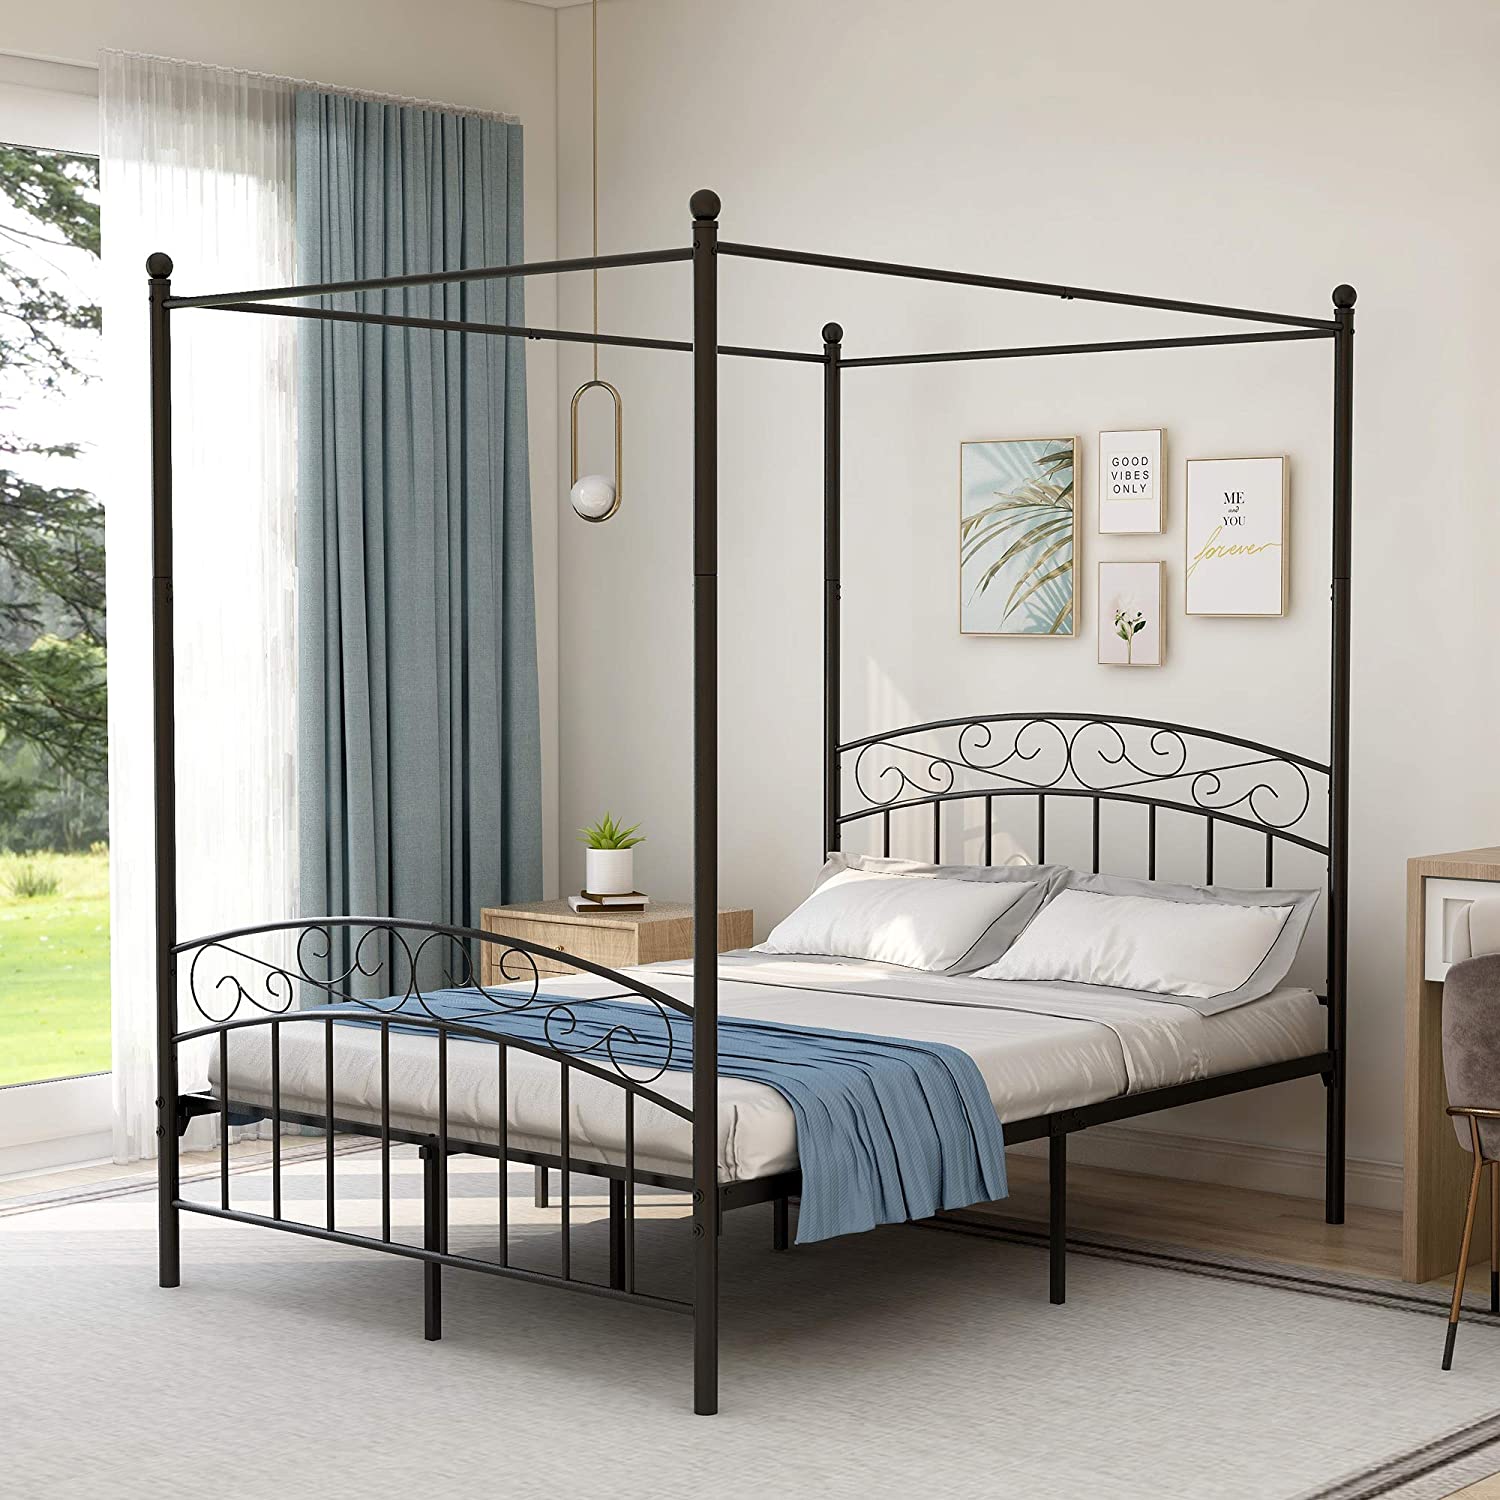 Top 10 Best Canopy Bed Frames Full in 2022 Reviews